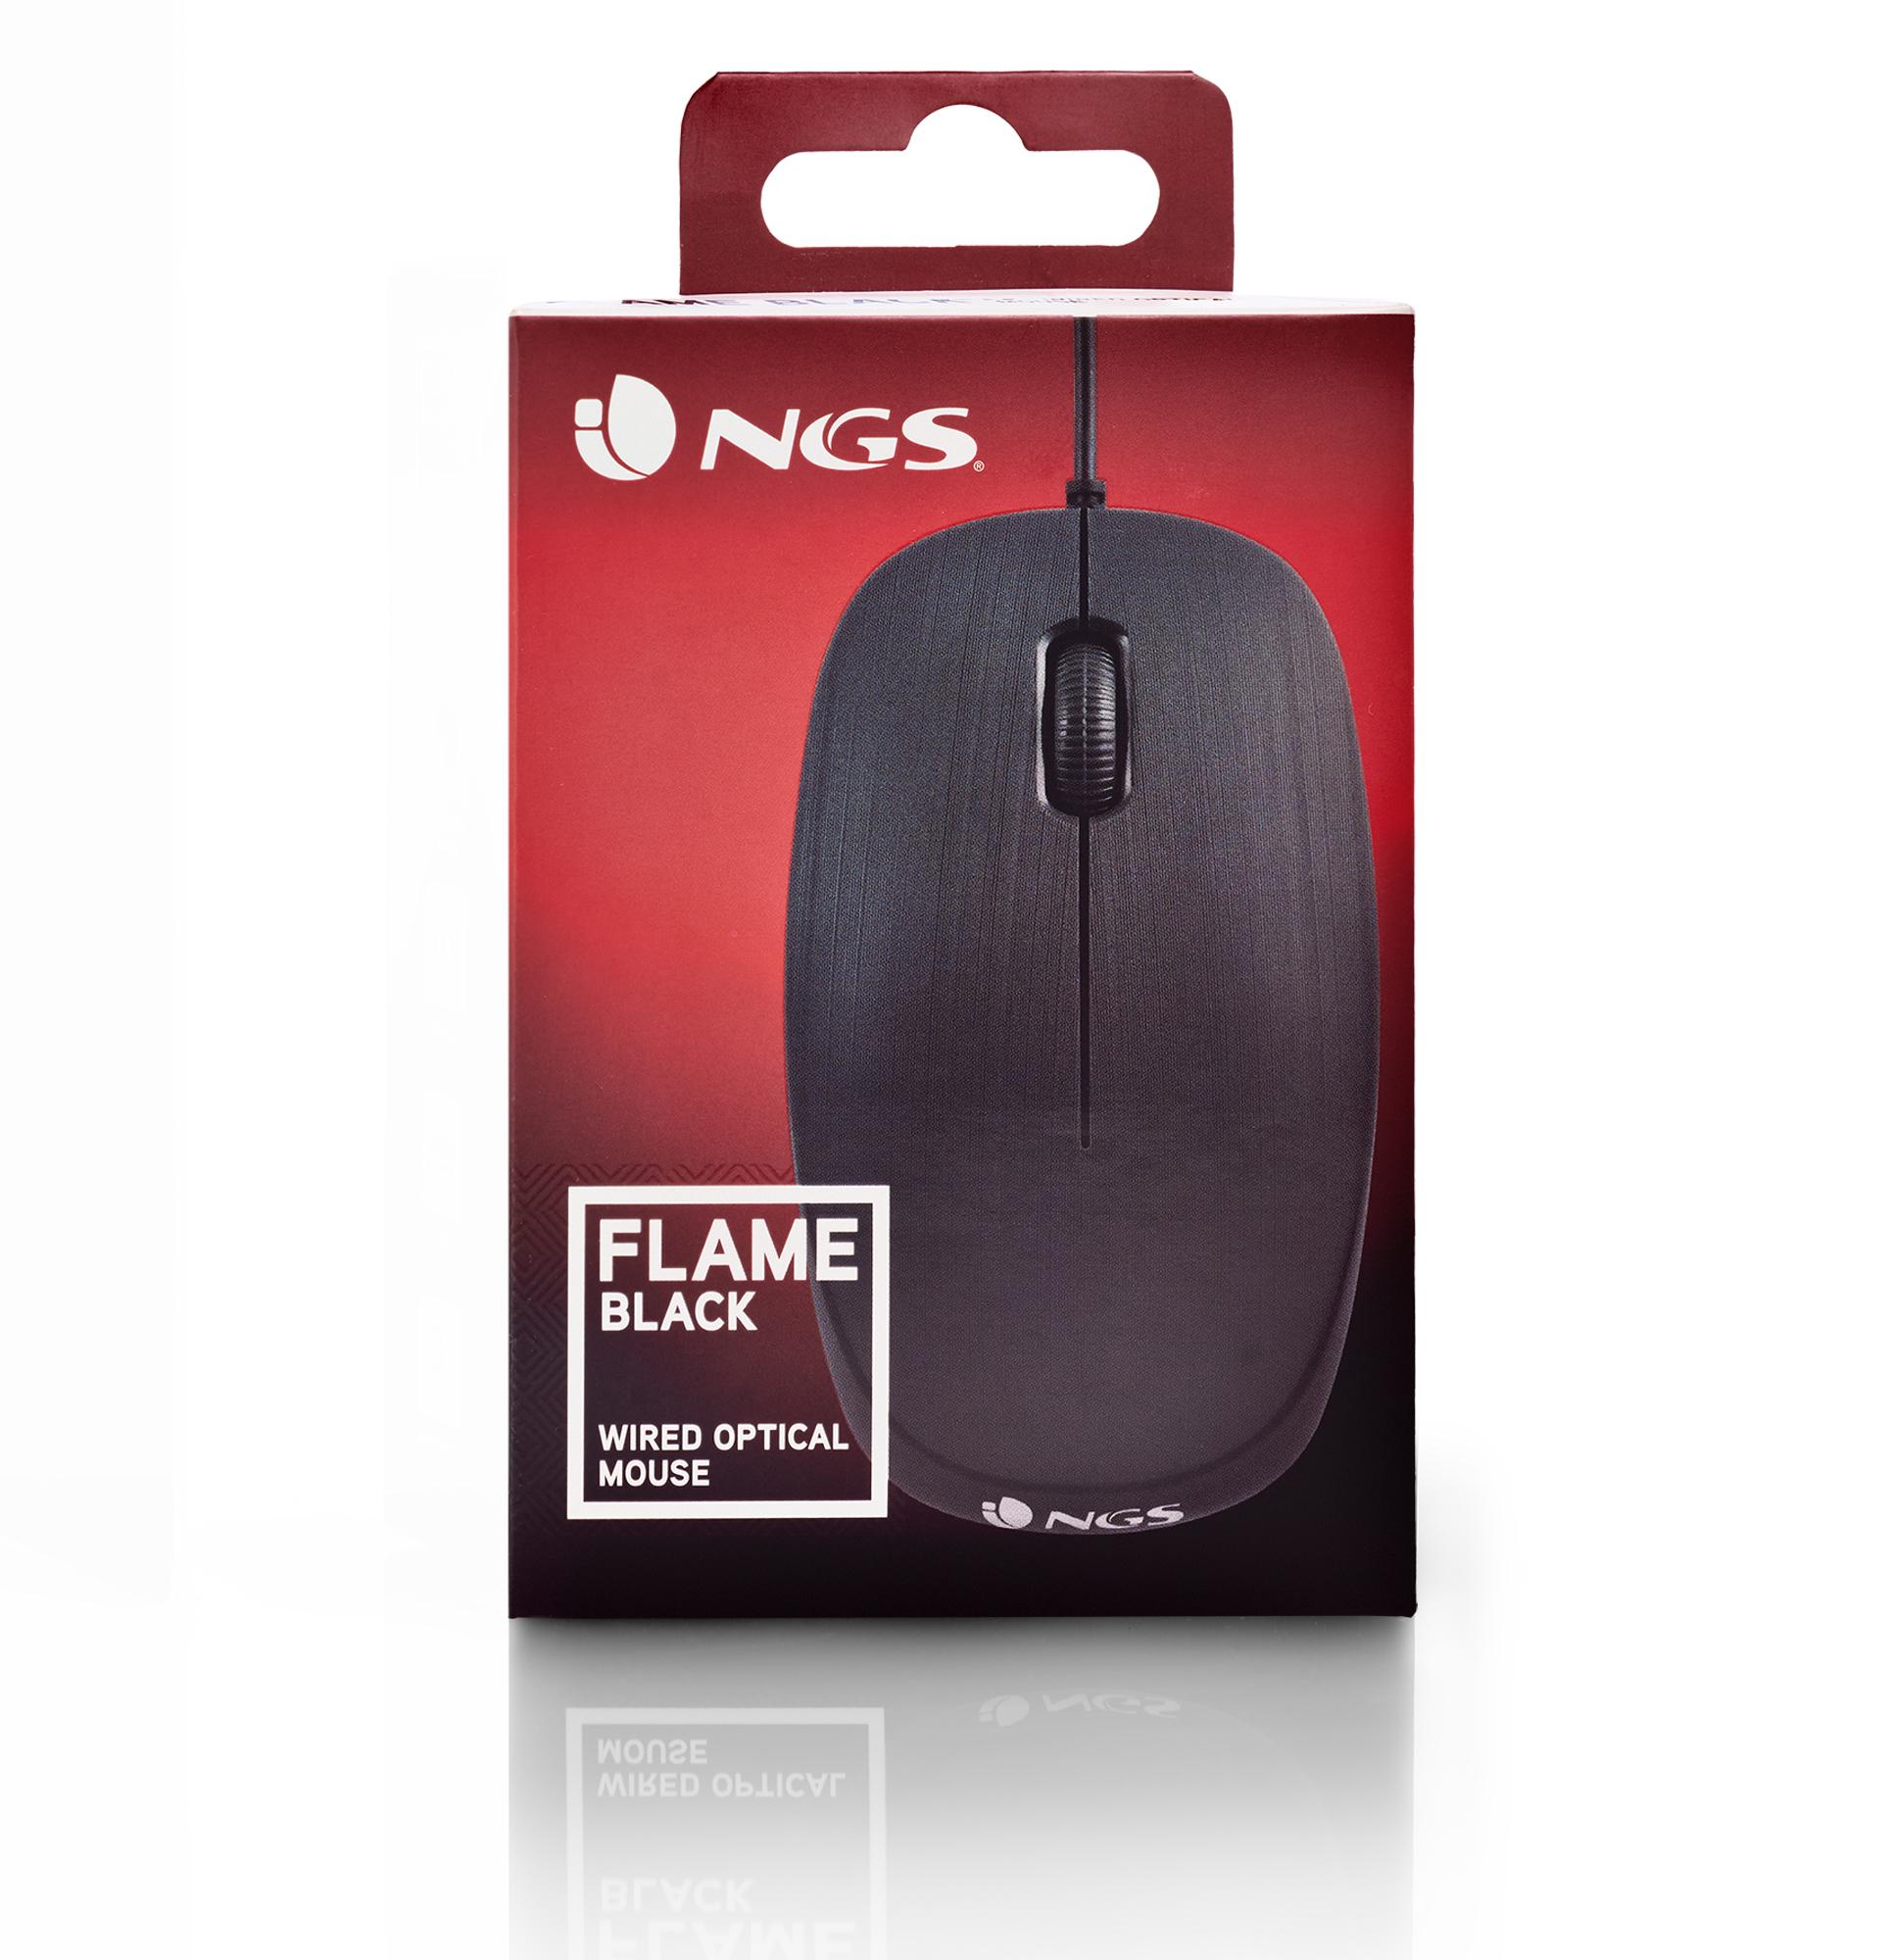 NGS FLAME Schwarz Maus,